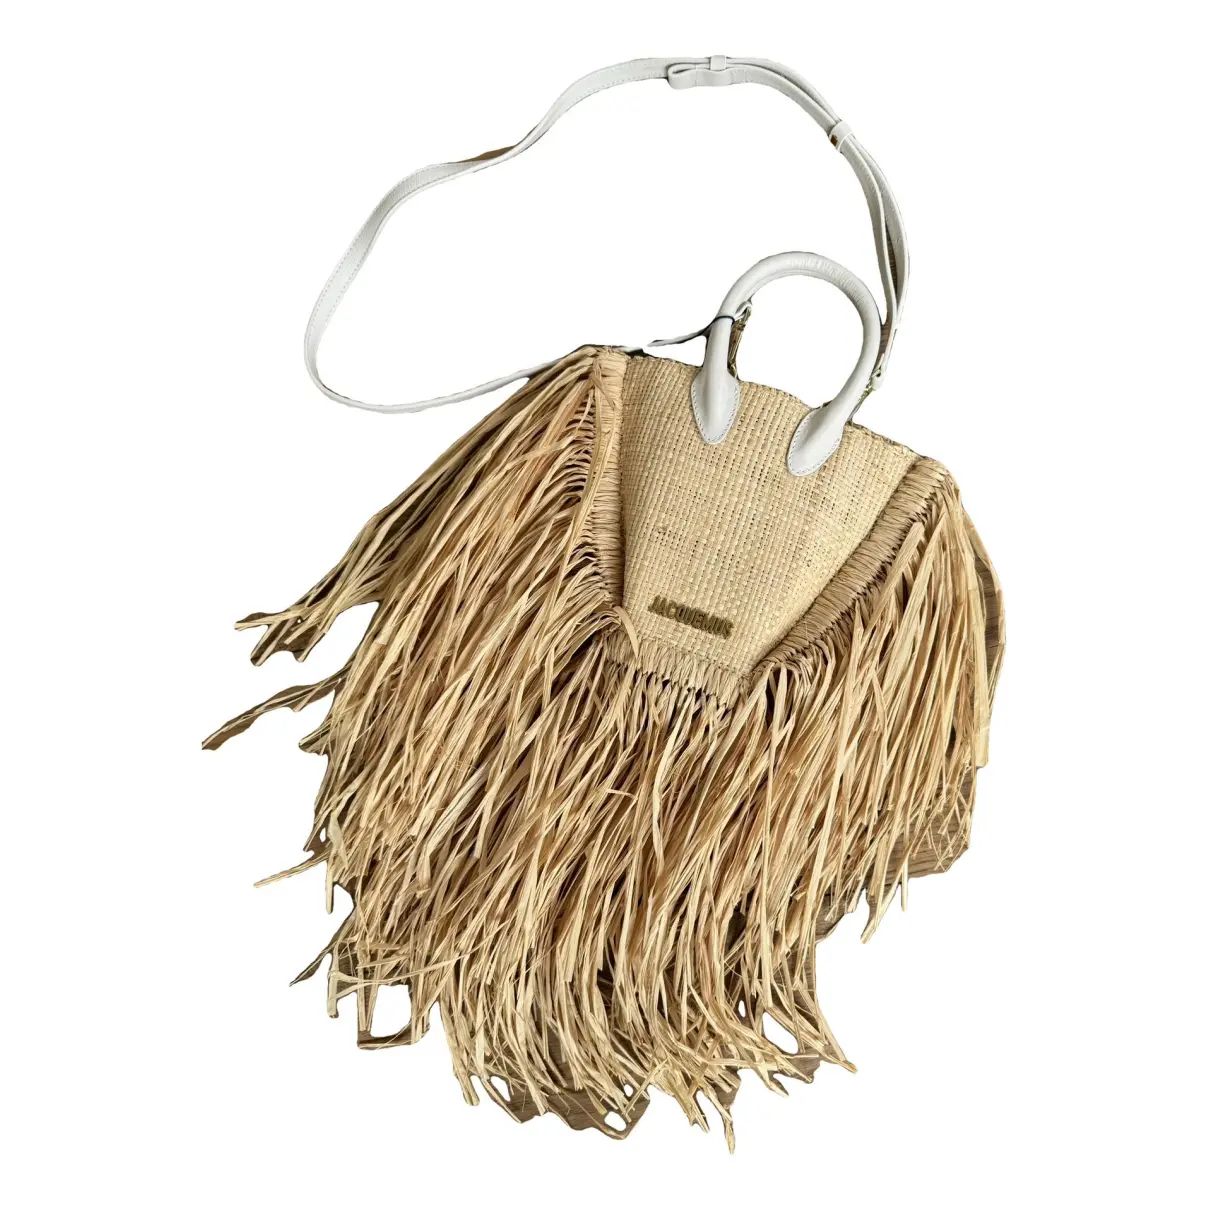 JacquemusLe Baci handbagNever worn, with tagBeige, Wicker$613.44$536.76Use code COLLECTIVE15 for ... | Vestiaire Collective (Global)